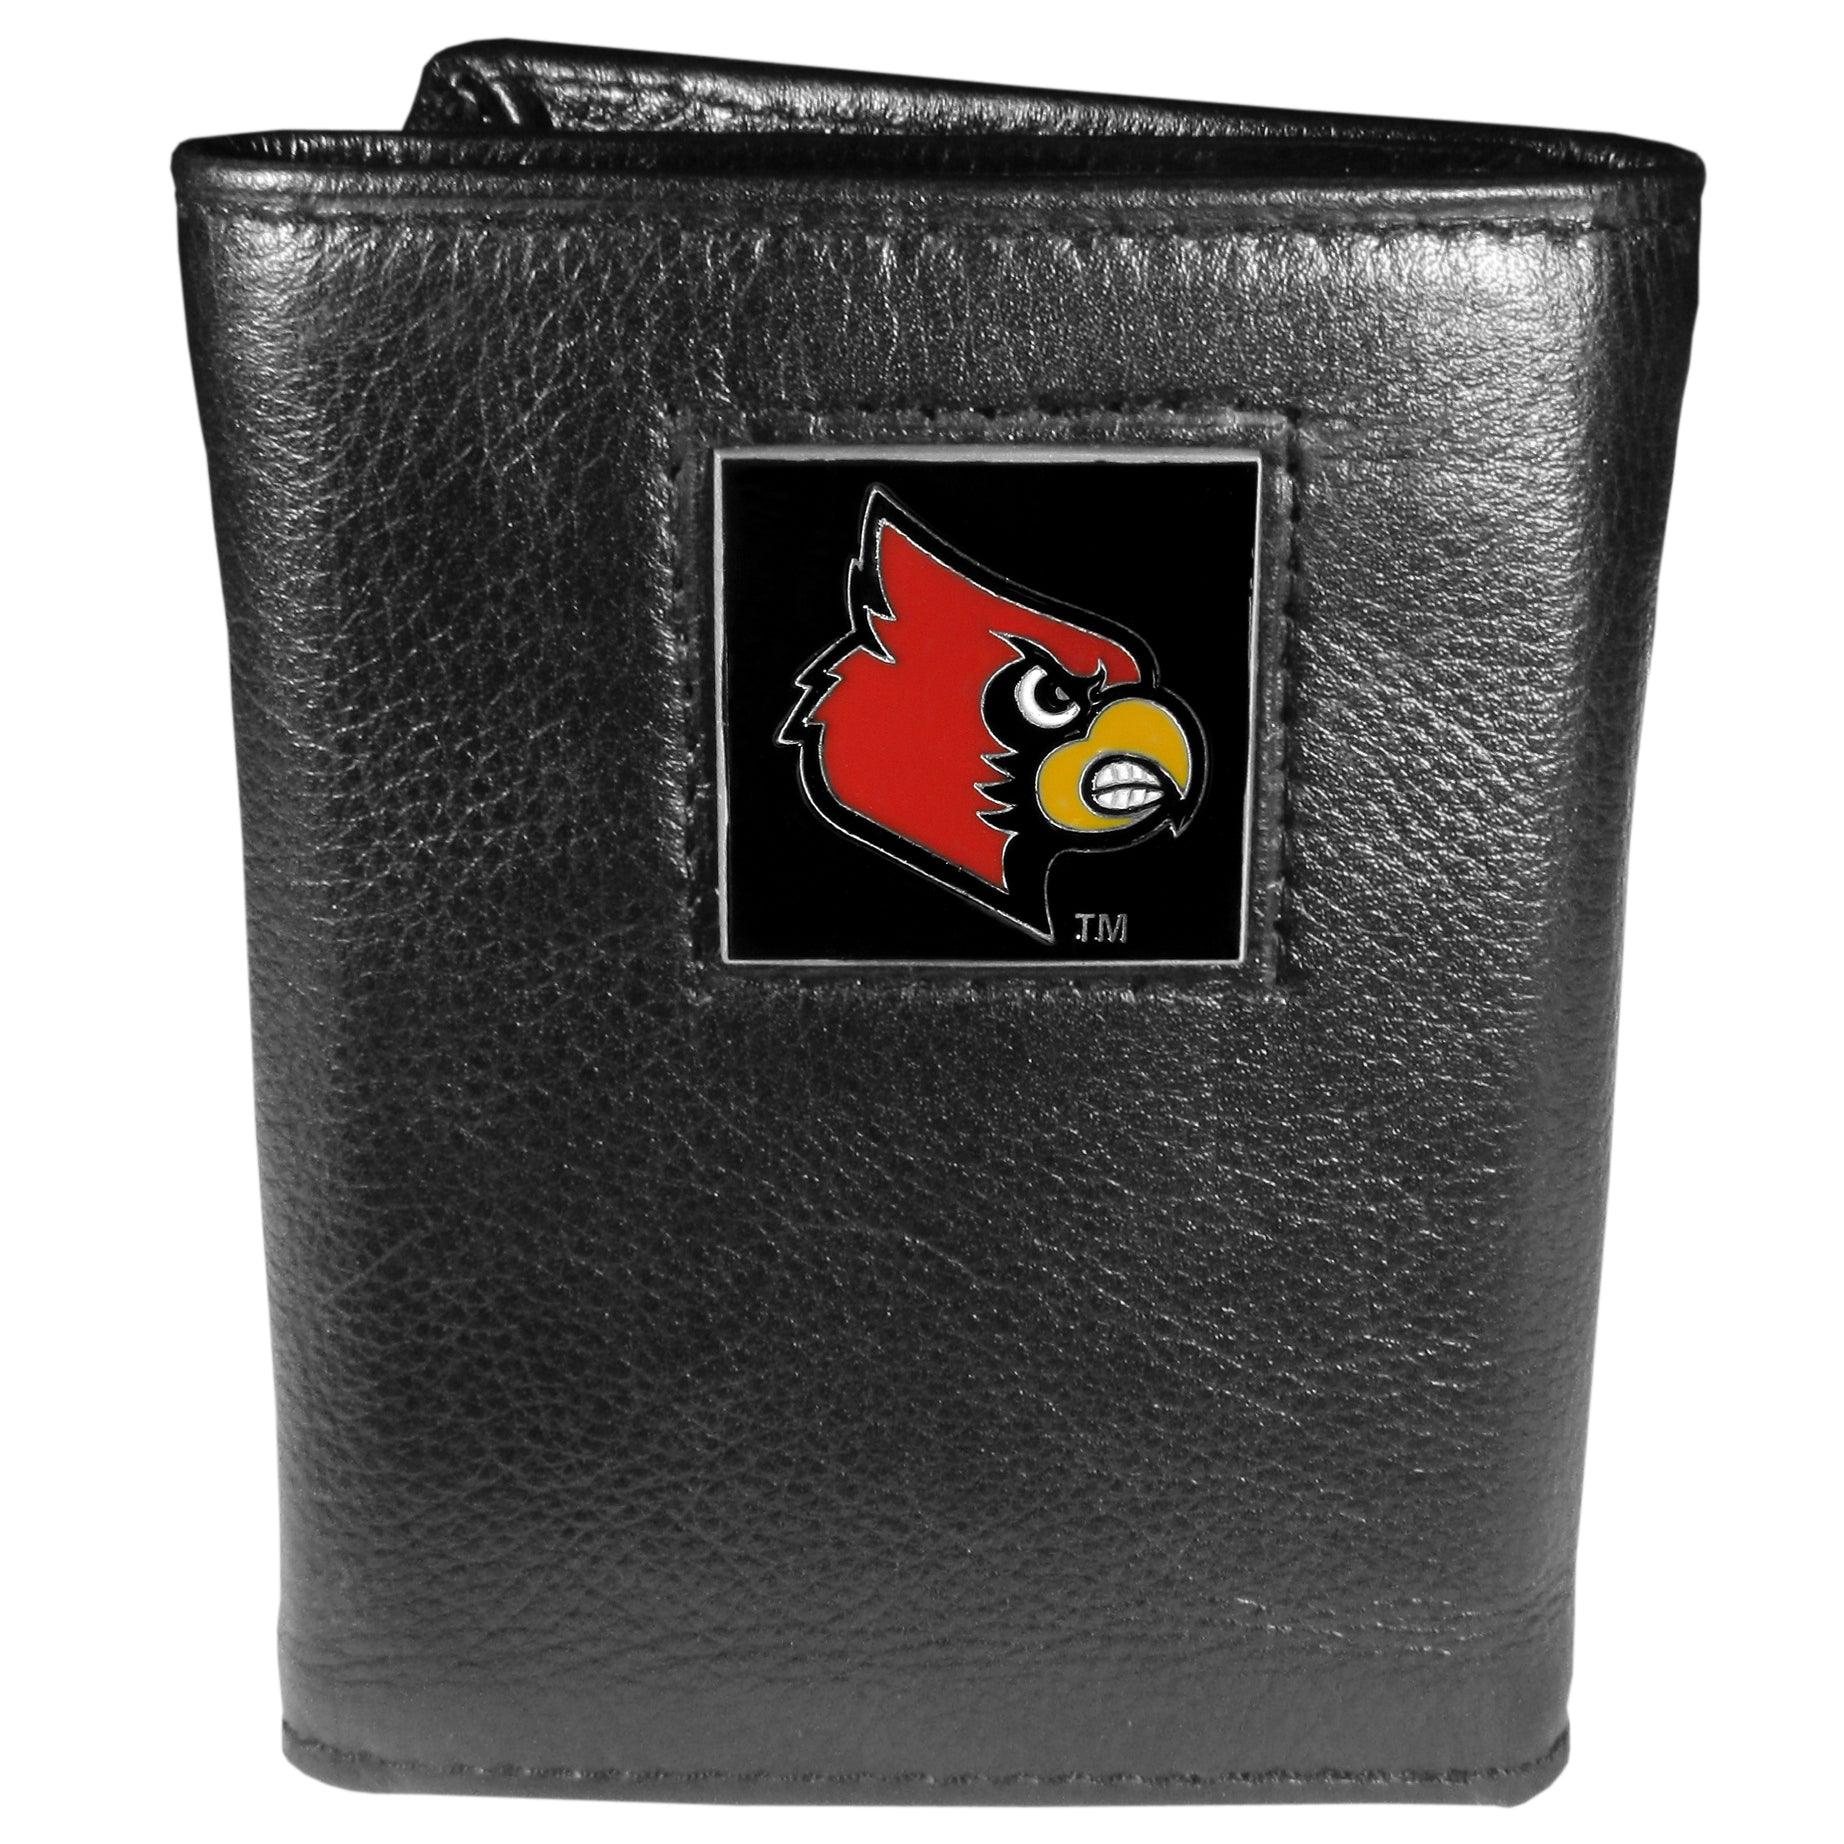 Officially Licensed NCAA Large Fanny Pack - Louisville Cardinals